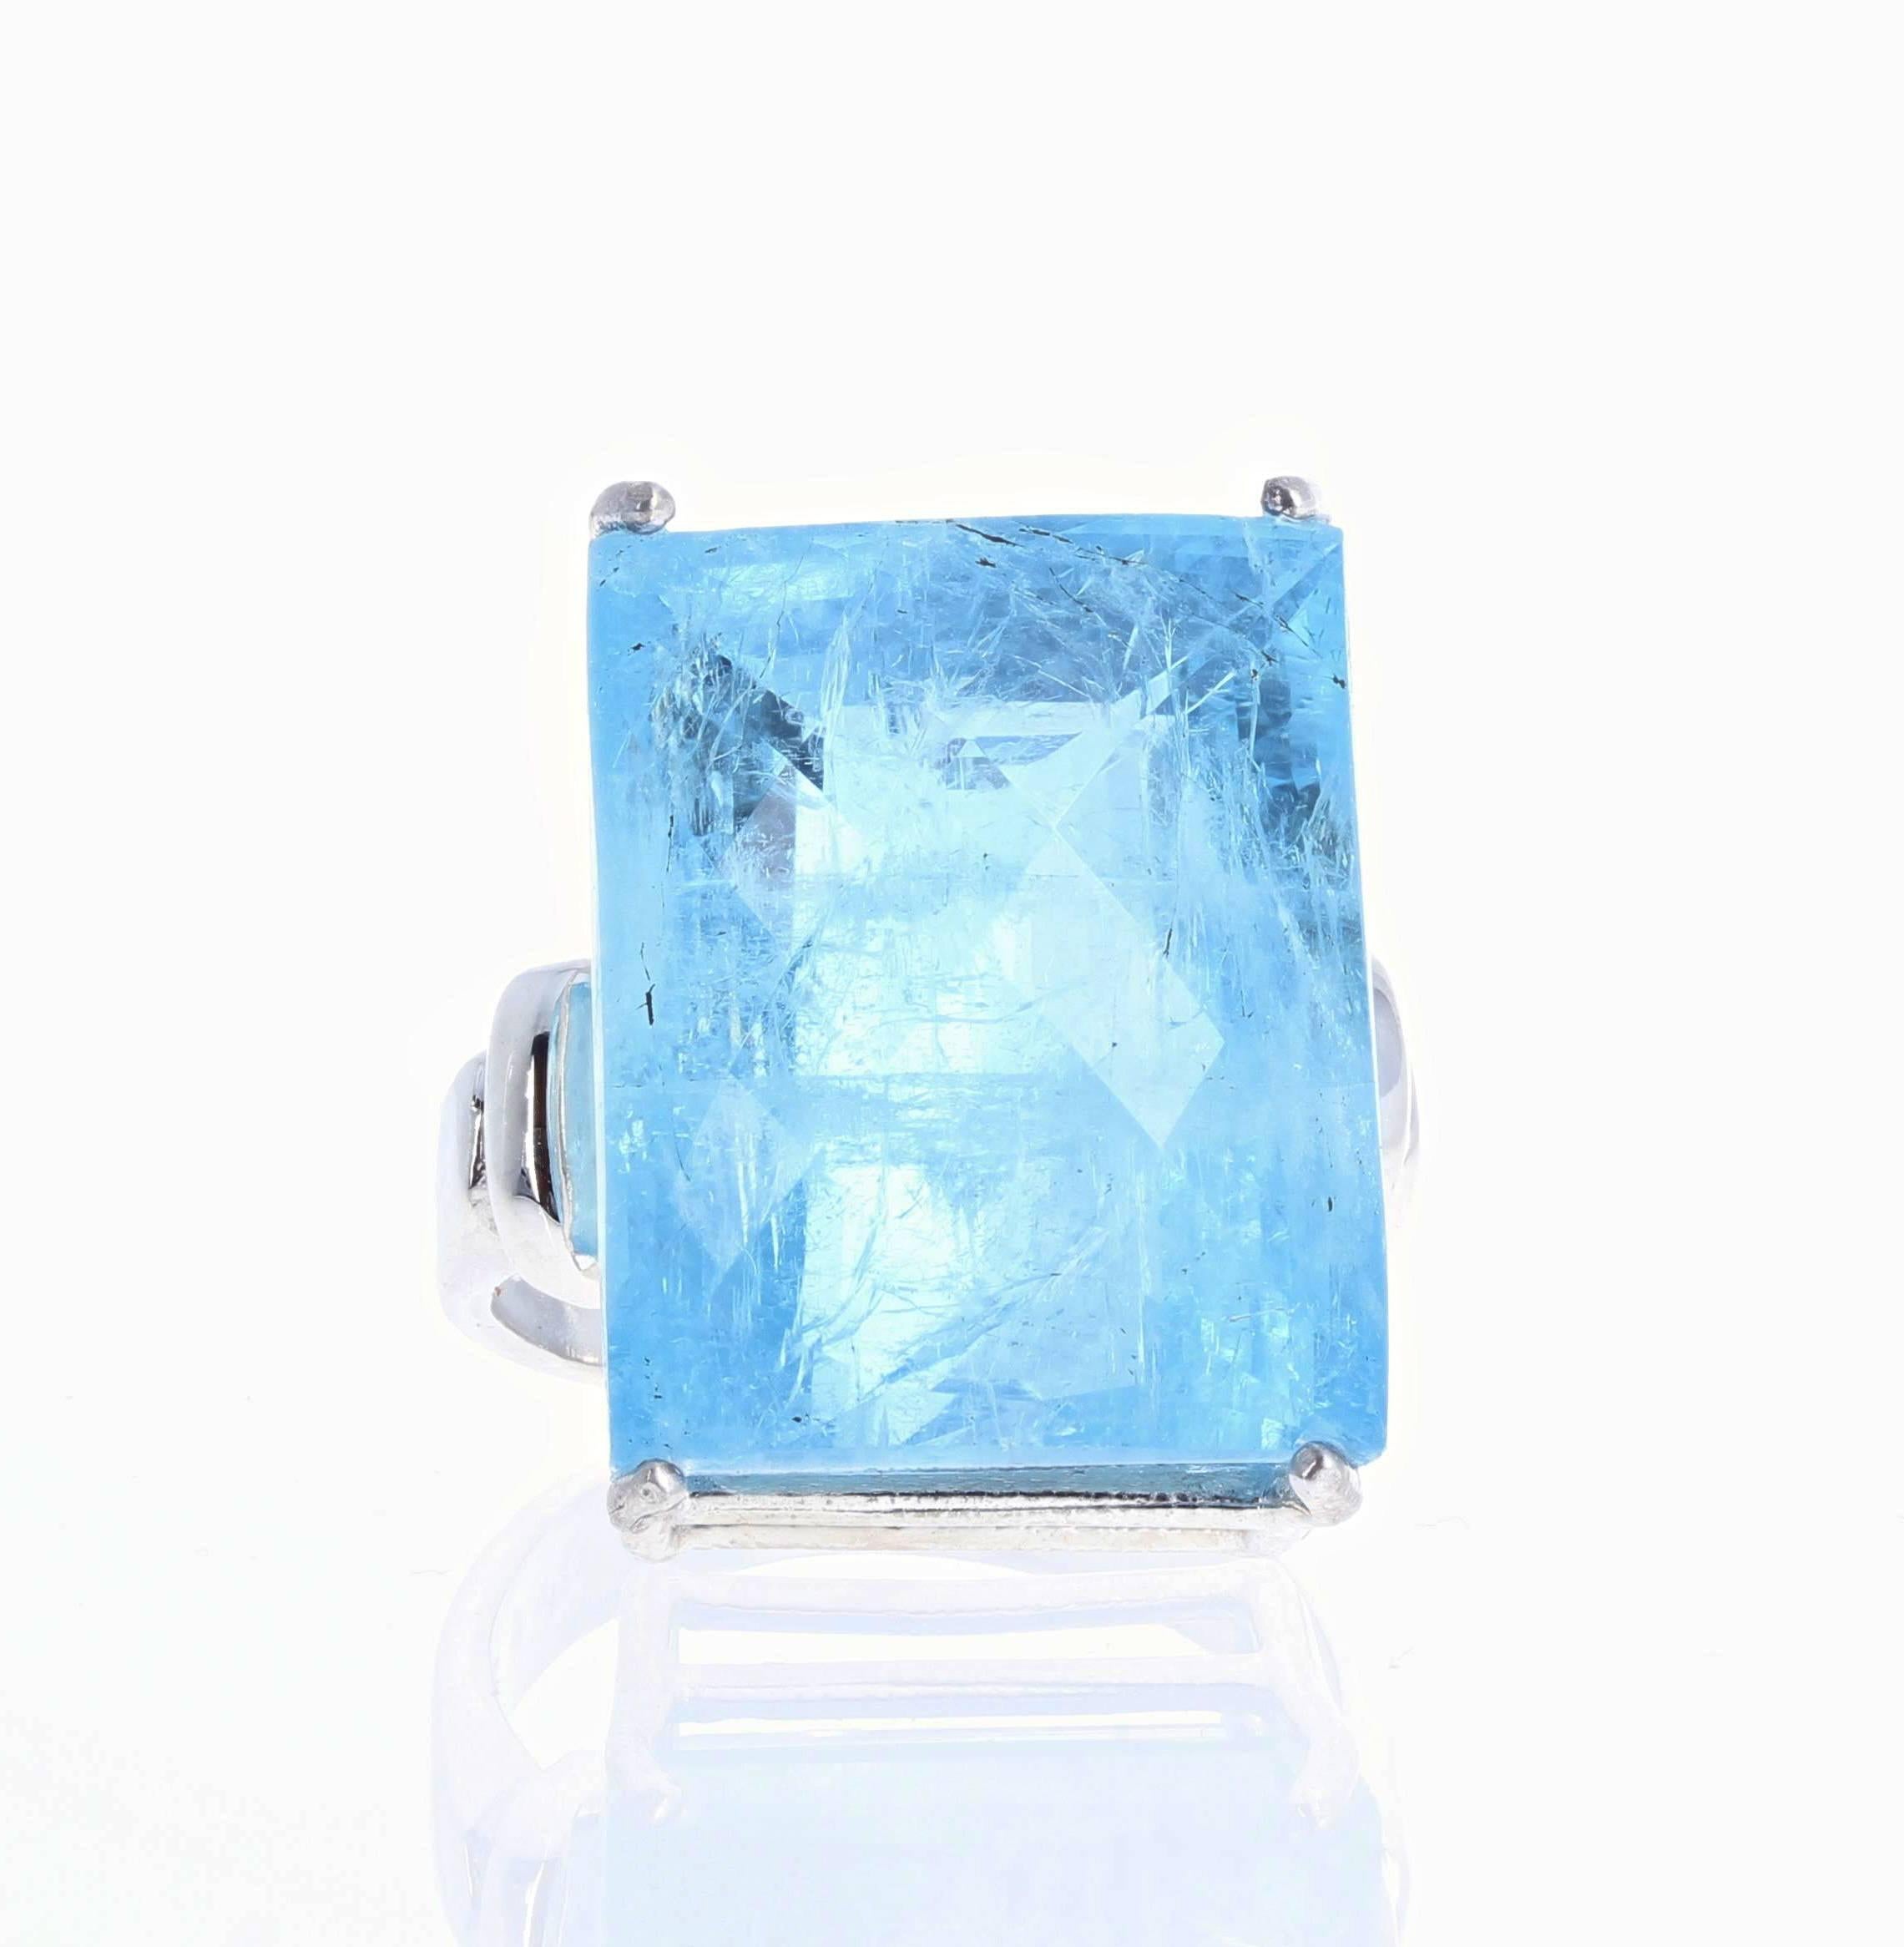 Huge glittering 43.4 carat blue natural Aquamarine gemstone (21.3 mm x 17.1 mm) set in a sterling silver ring size 9 (sizable).  Spectacular optical effects of the natural inclusions exhibits reflections and highlights in spectral blue colors.